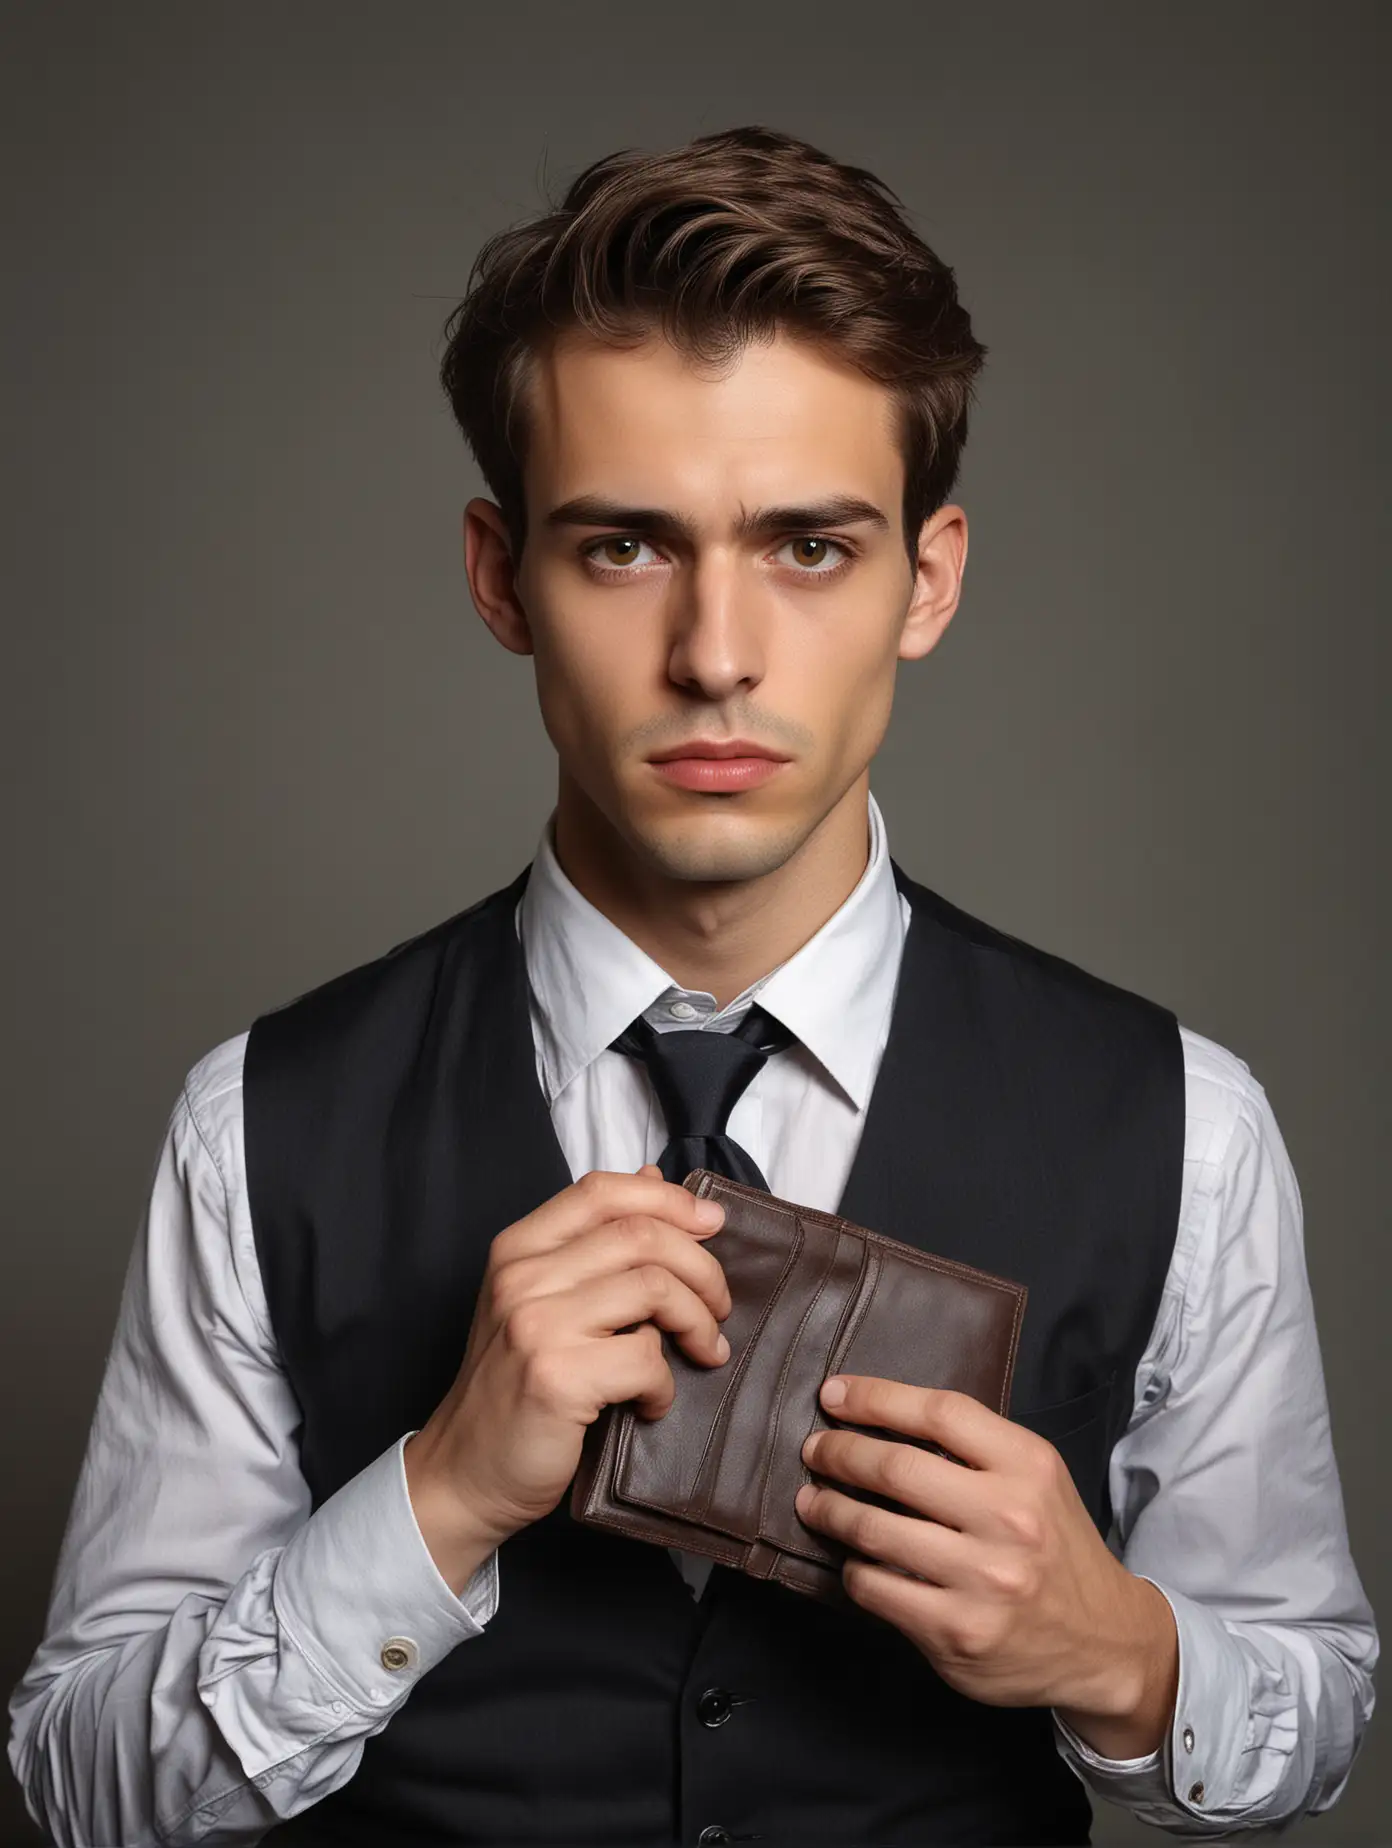 A handsome young man in business attire holding an open wallet with no money inside, standing against a gray background. He is looking at the camera and has brown hair styled neatly. The photo was taken from a front view with natural lighting that highlights his facial features. His expression shows anger or despair as he holds out the empty purse. The style of the photo is reminiscent of an early 20th century portrait in the style of Edward Steichen